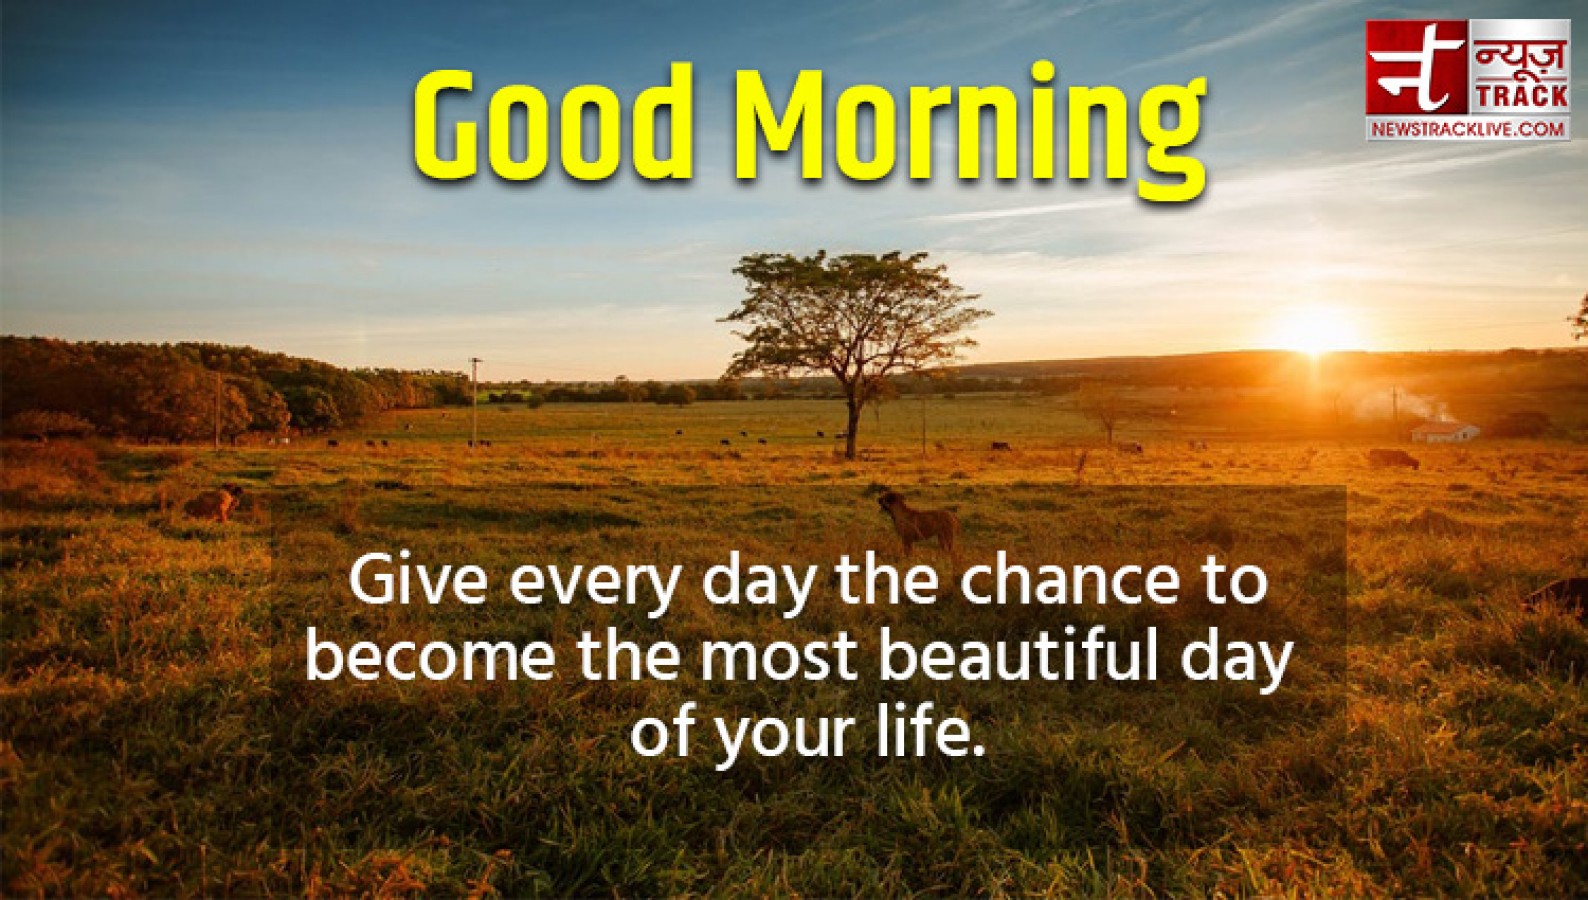 Goodmorning Quotes: Give every day the chance to become the most ...